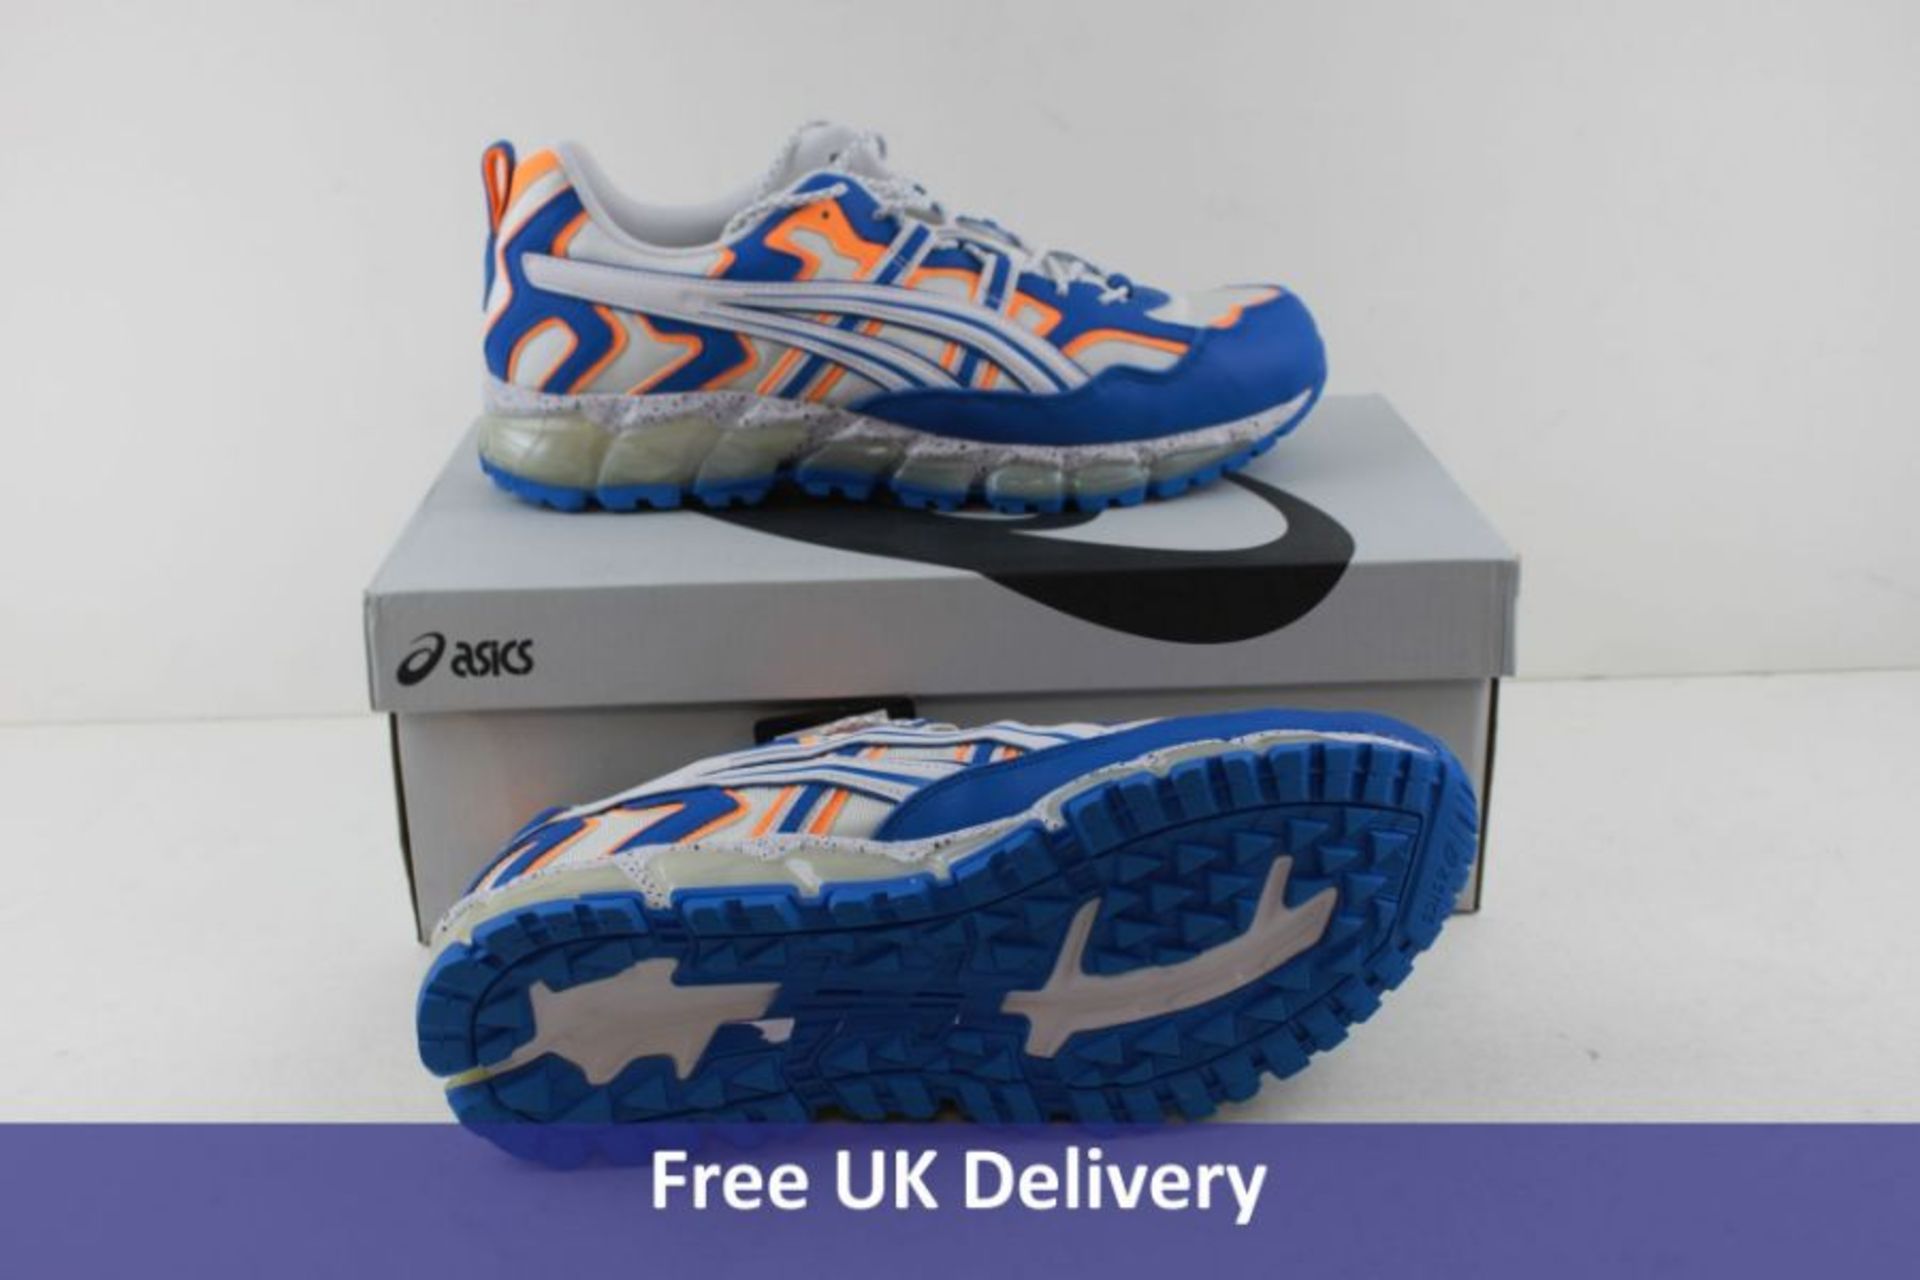 Asics Men's Gel Nandi360 Trainers, White and Electric Blue, UK 11